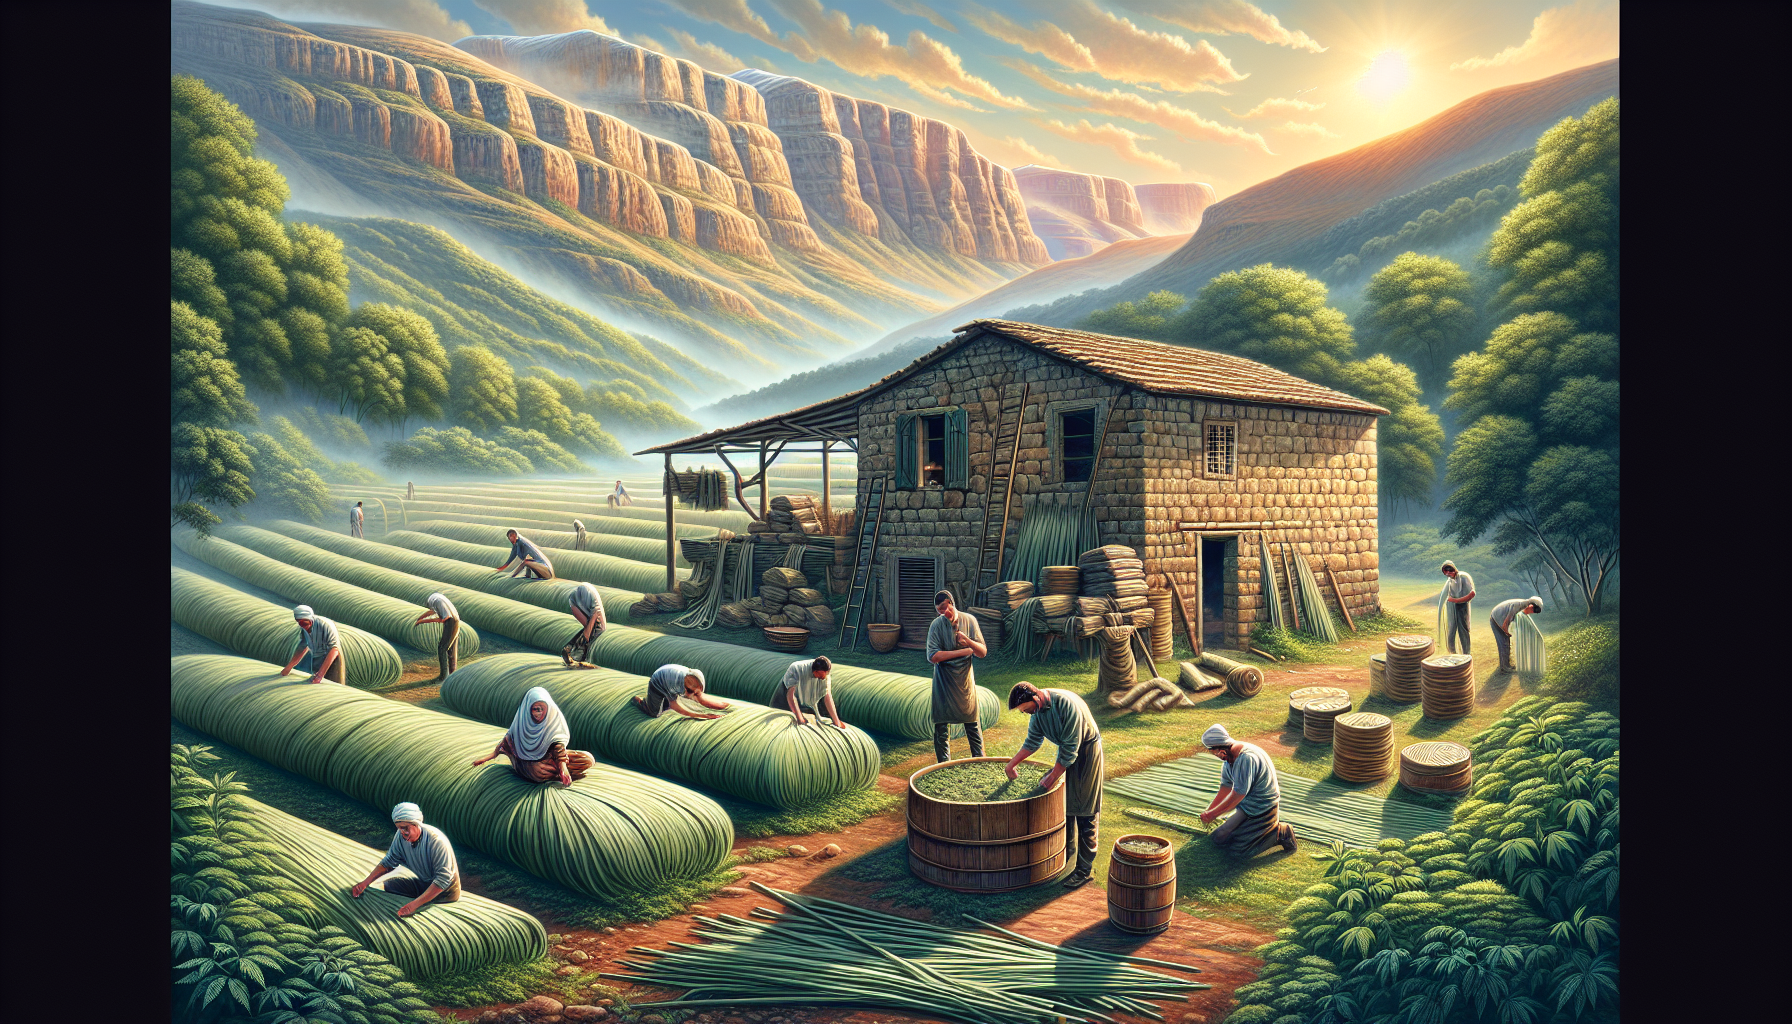 A stylized illustration of a traditional Lebanese Hash production process in a scenic setting.